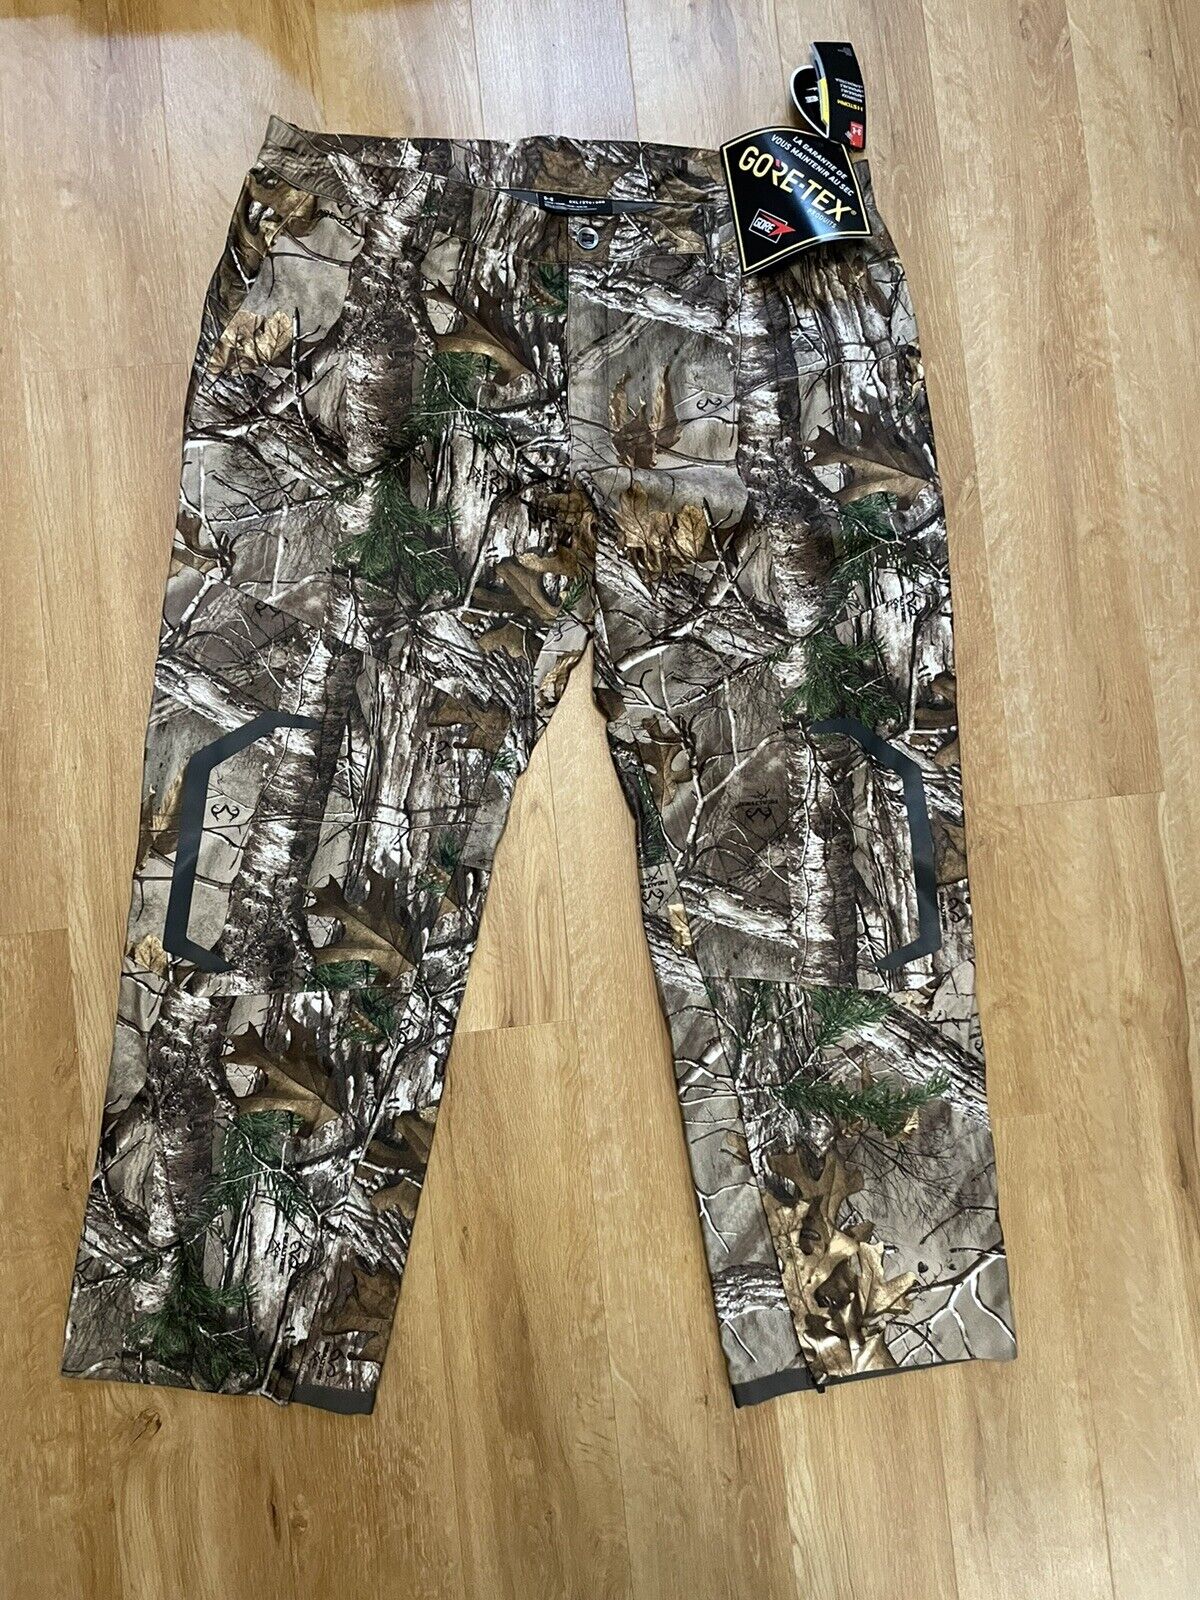  $225 Under Armour Storm 3 RealTree Camo Gore-Tex Hunting Pants Mens 3XL